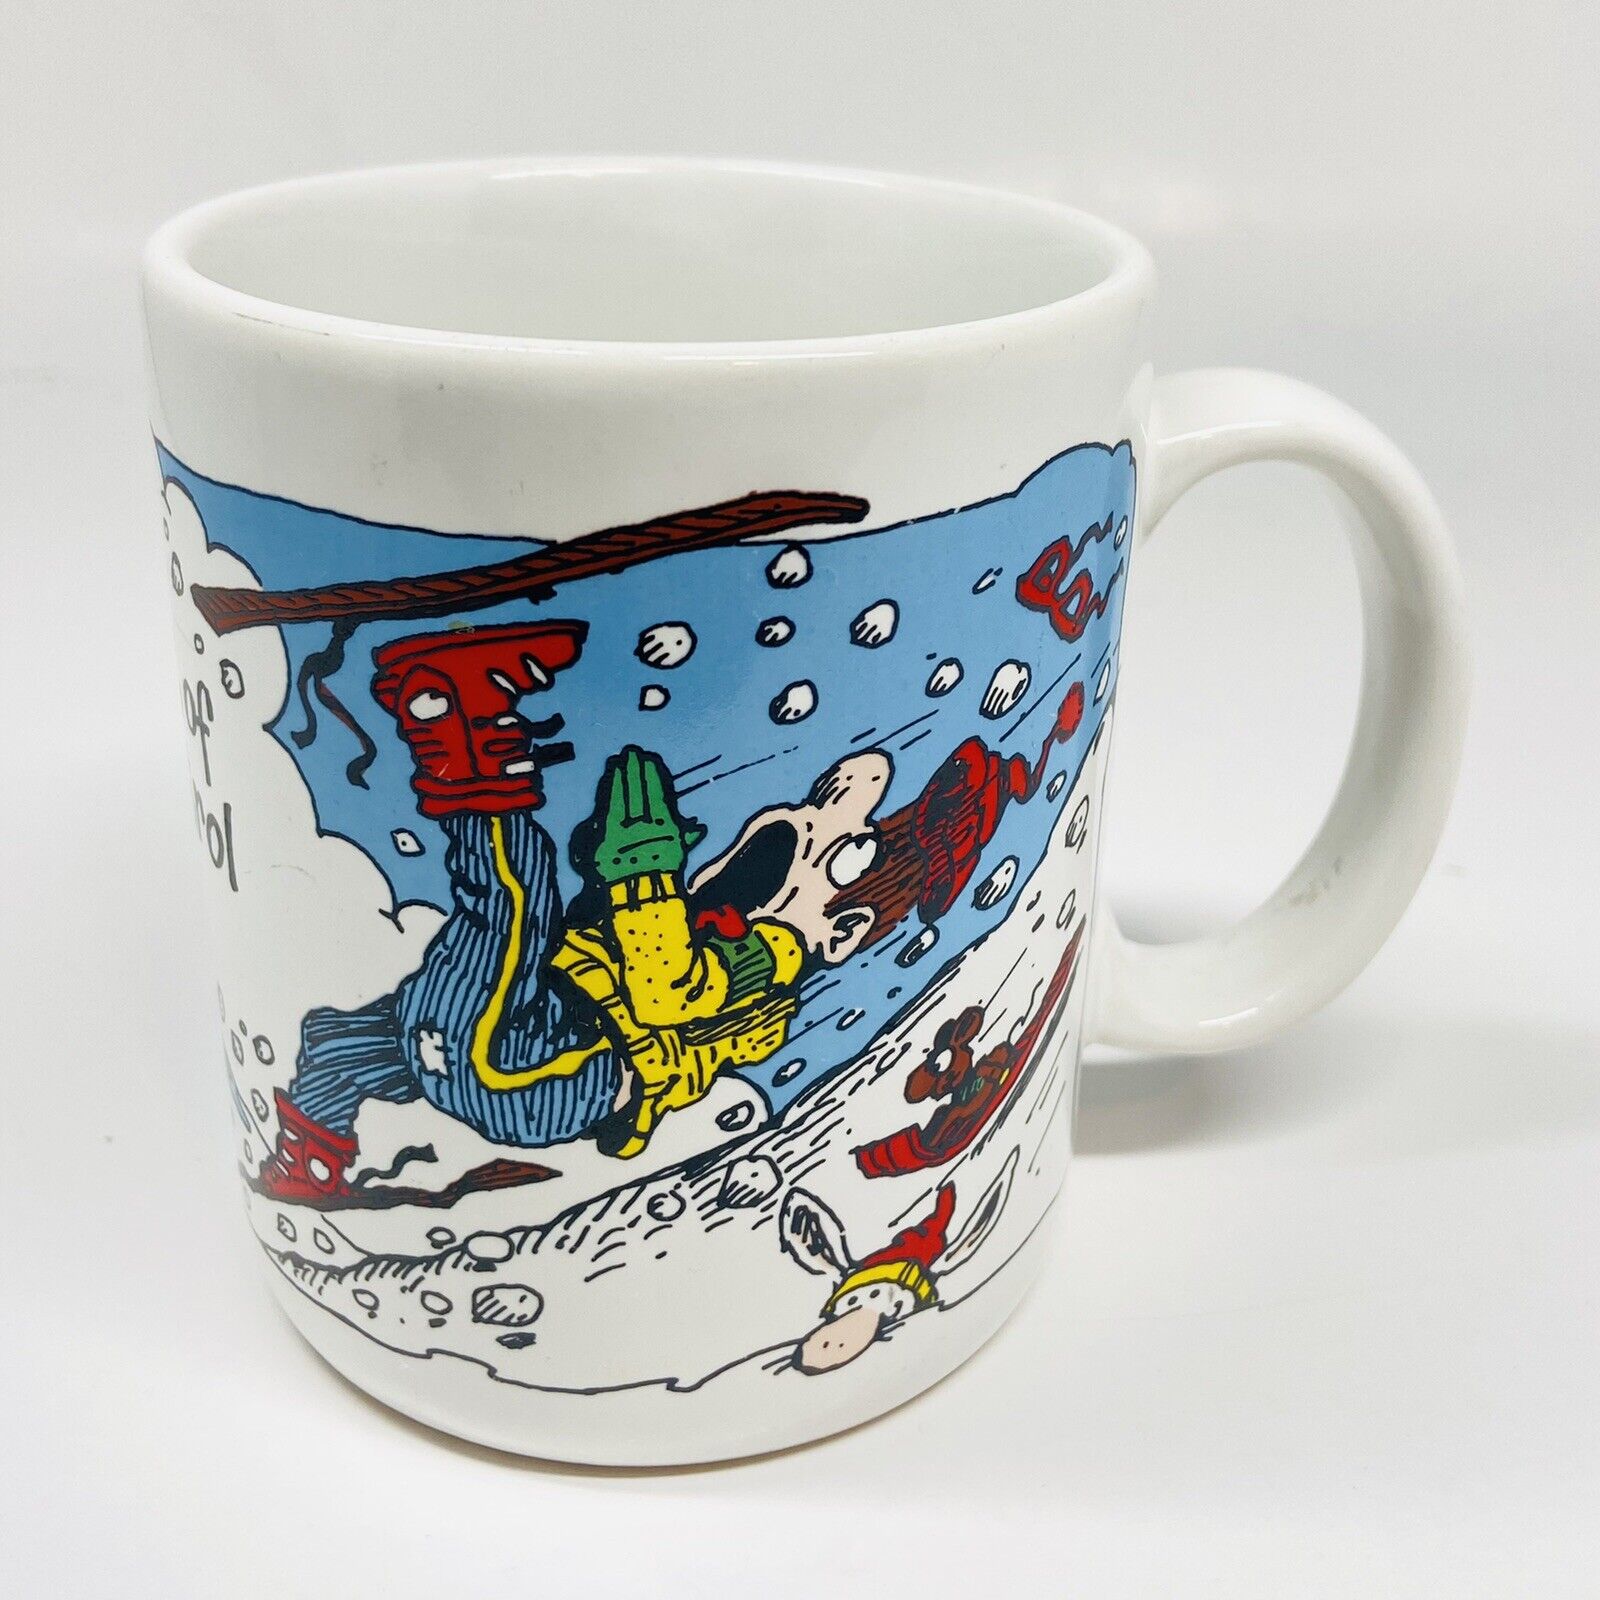 VTG Gary Patterson 10 oz Mug Out of Control Ski By Thought Factory Japan